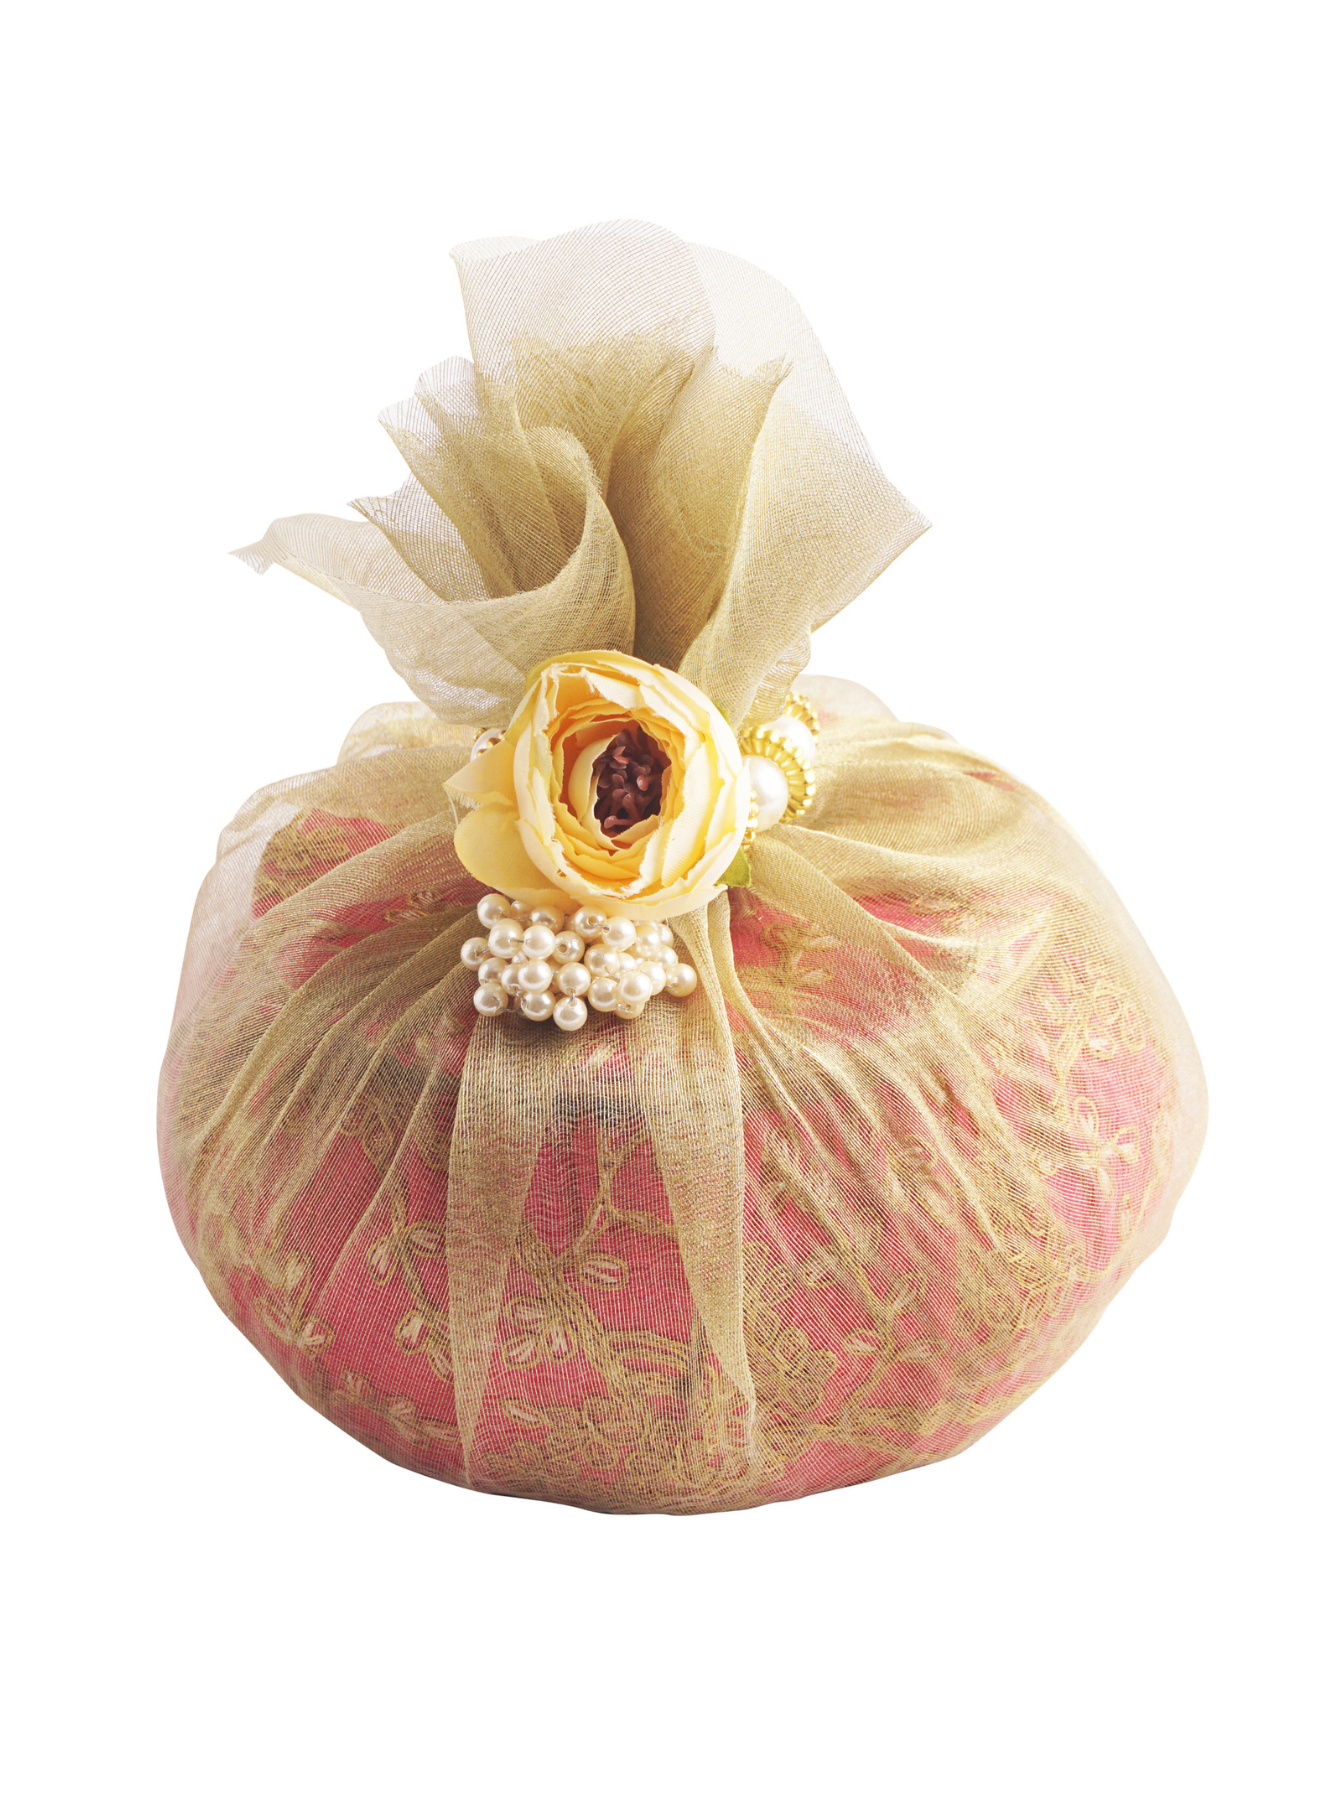 Medjoul Dates with Adorned Matki with Tissue Wrap (12 Individually Wrapped Pcs)